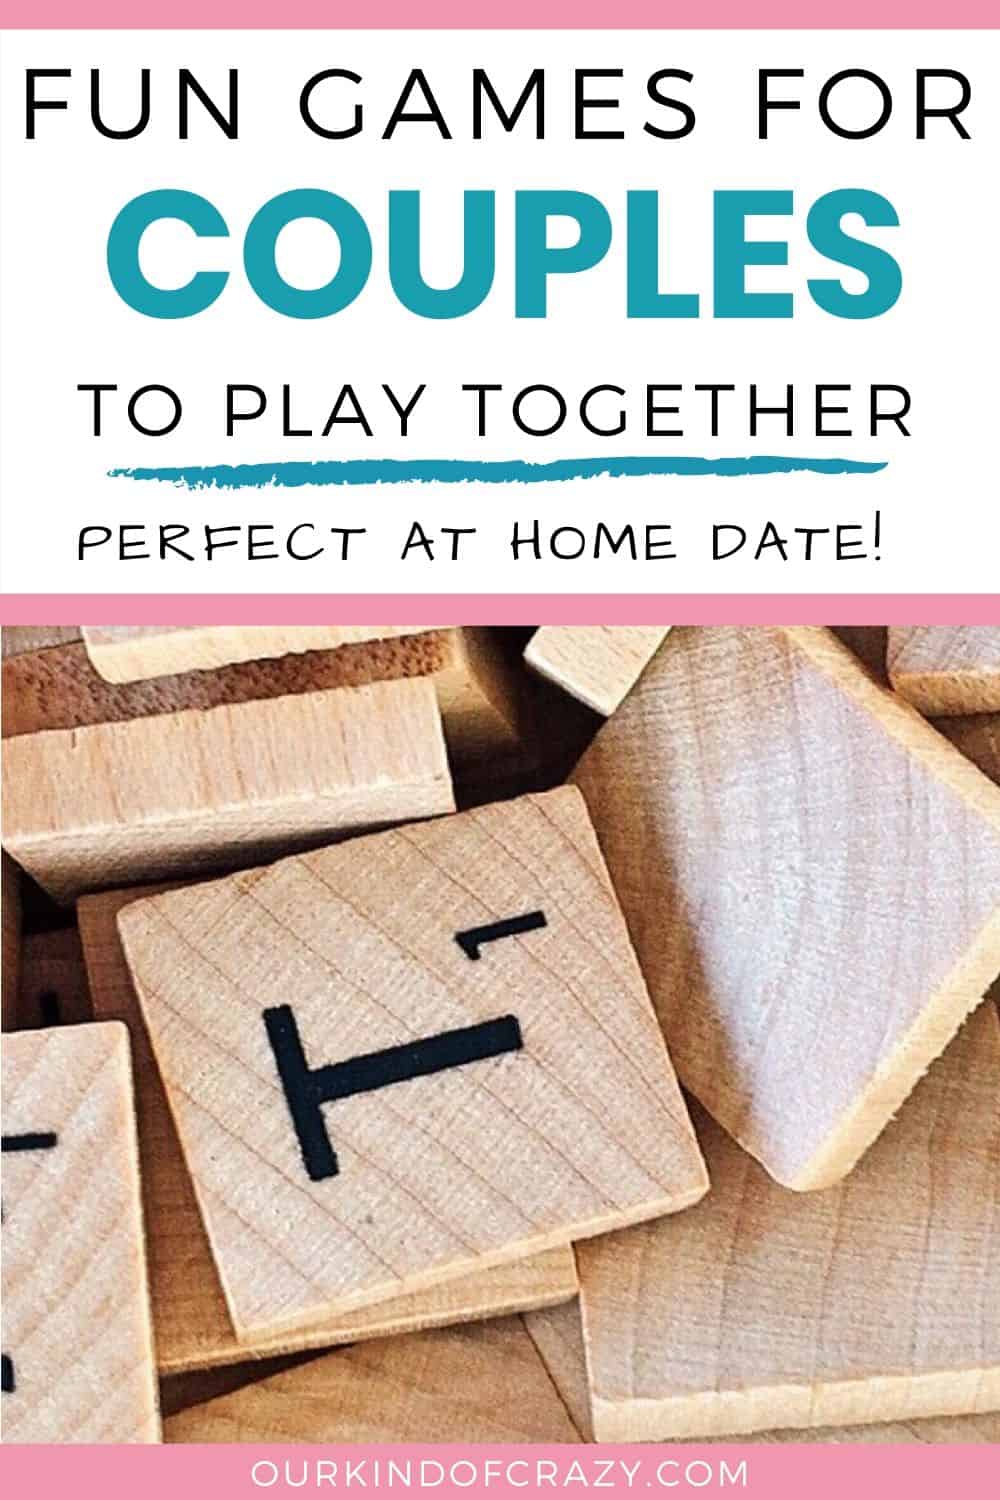 Games For Couples 3 